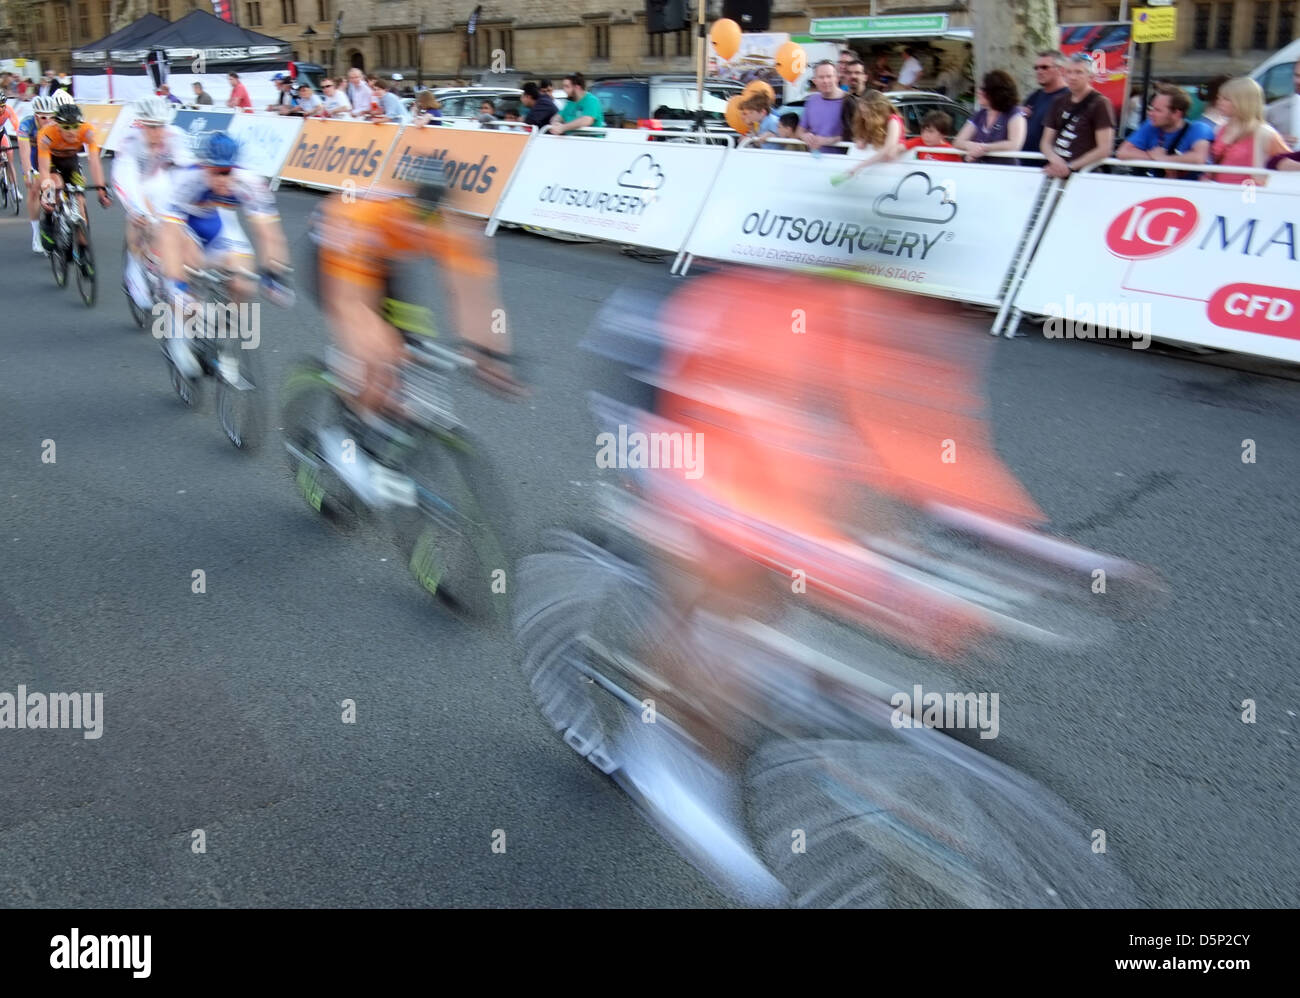 A road cycle race in the Halfords tour in Oxford City Centre. 2012 Stock Photo